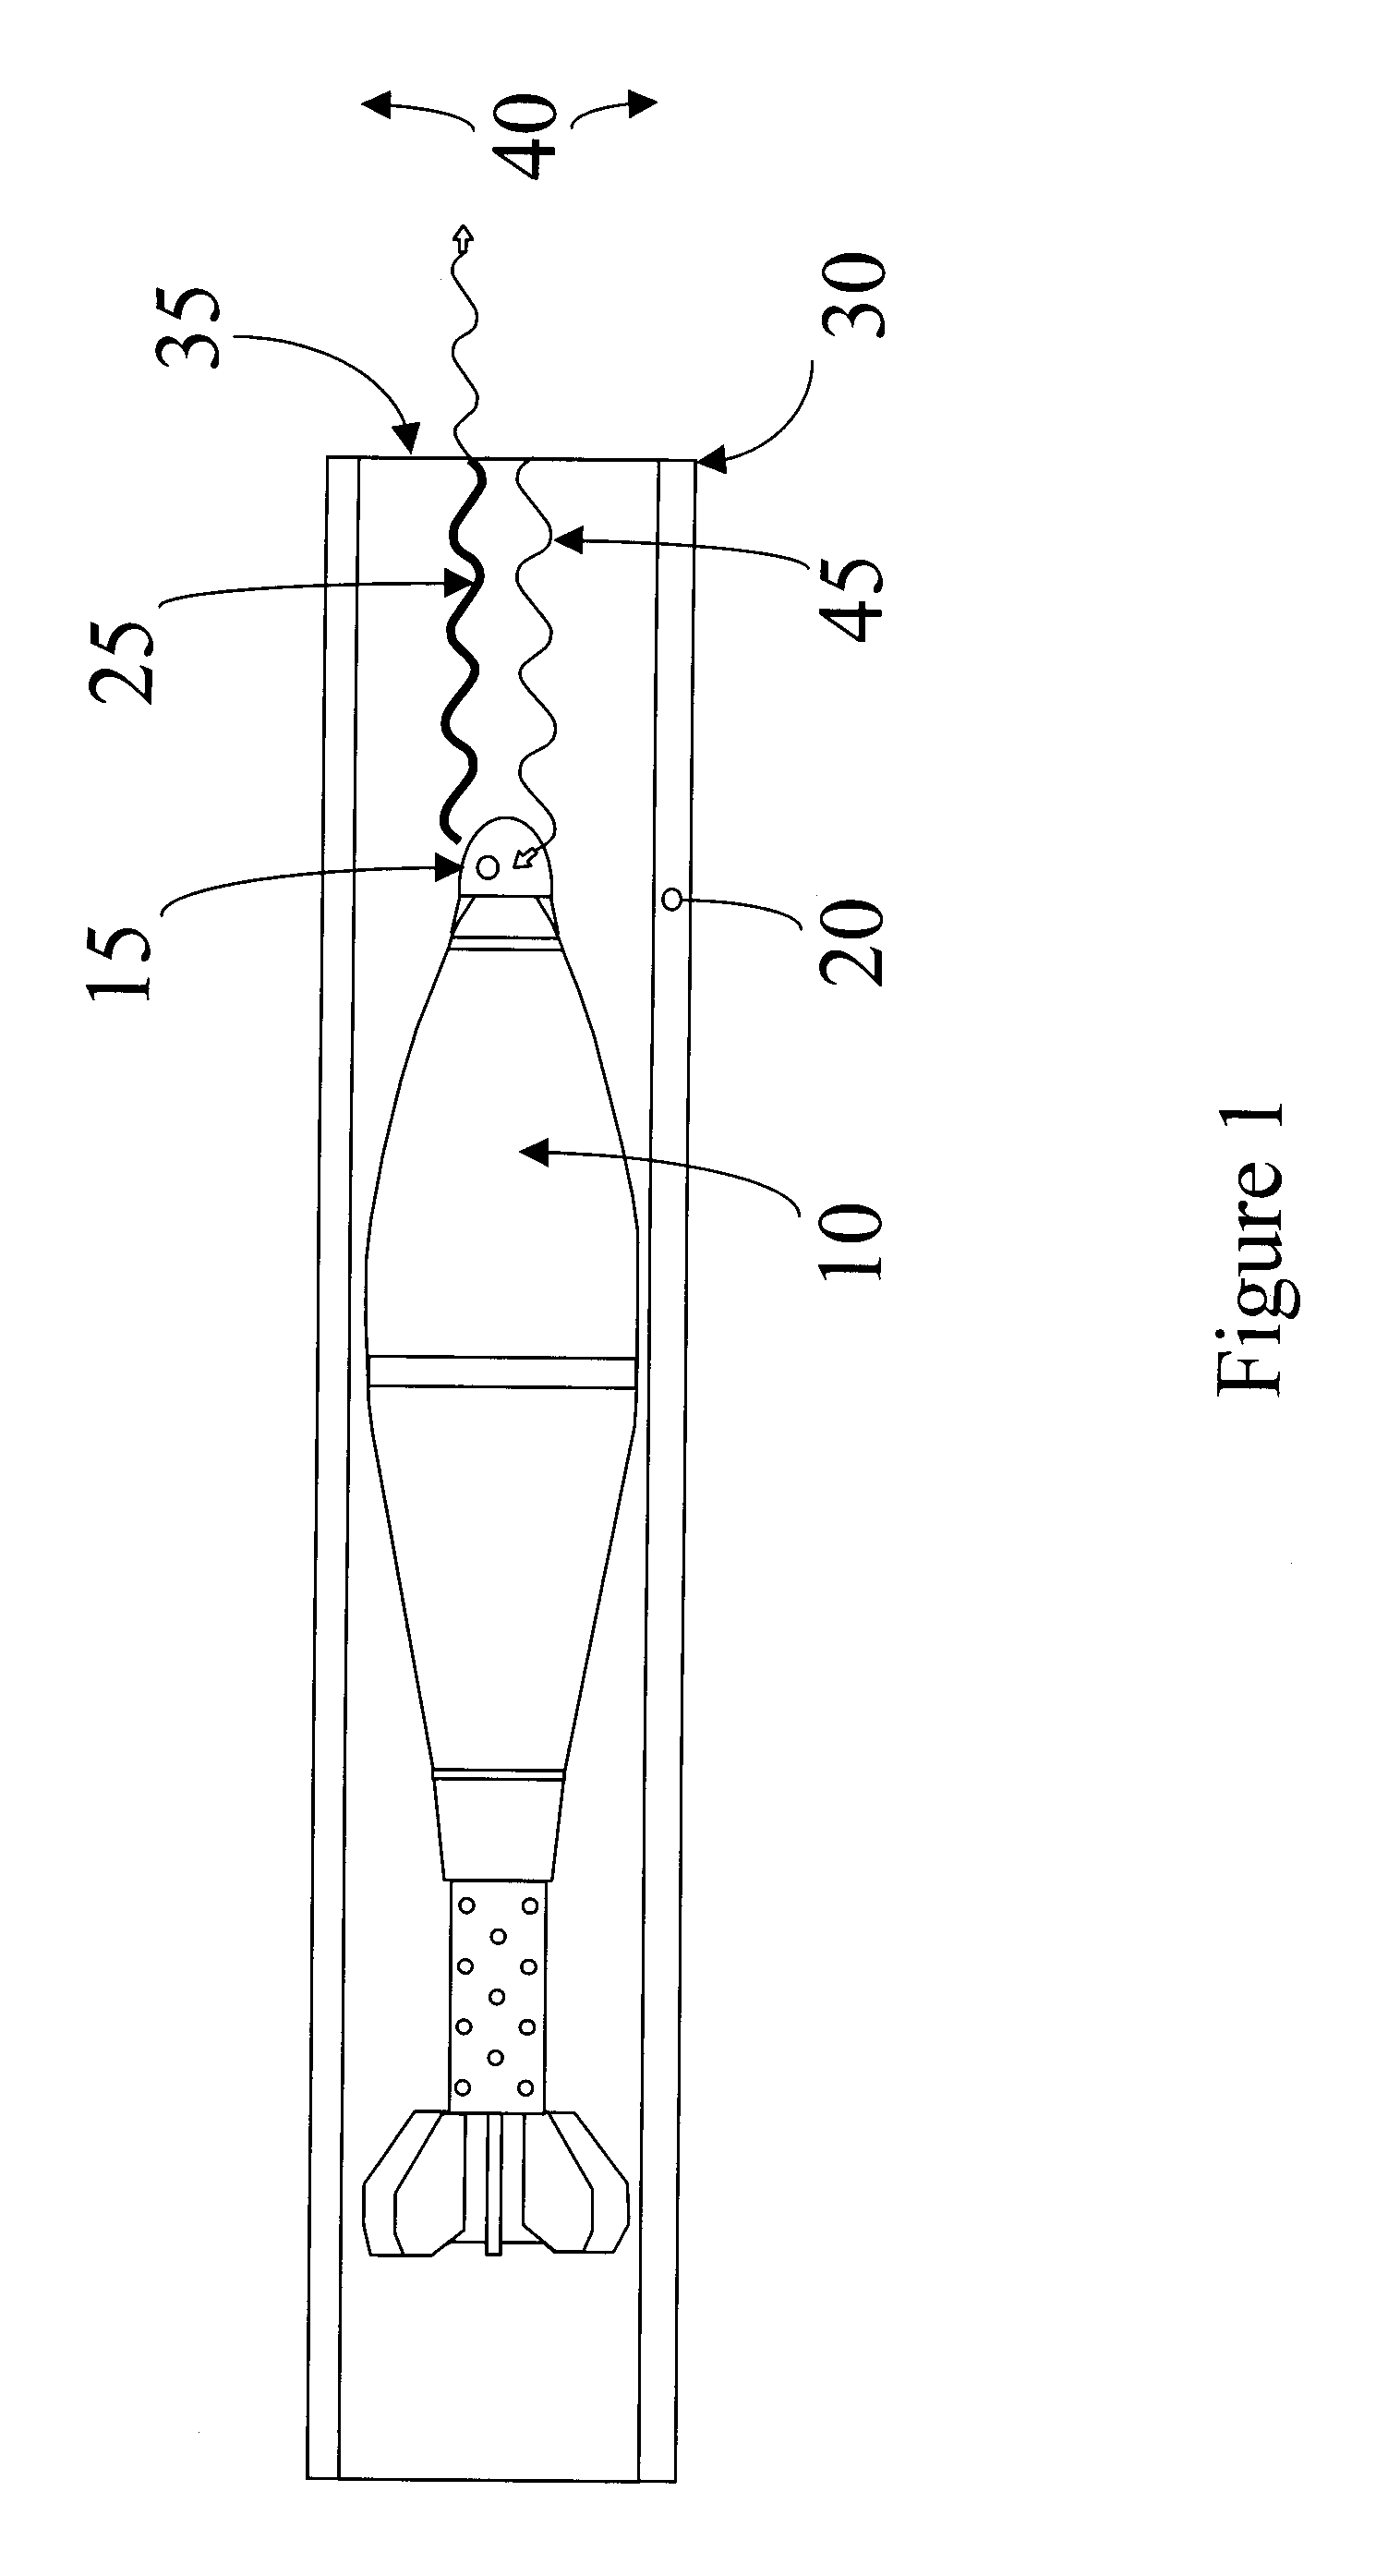 Projectile launch detection system utilizing a continuous wave radio frequency signal to confirm muzzle exit